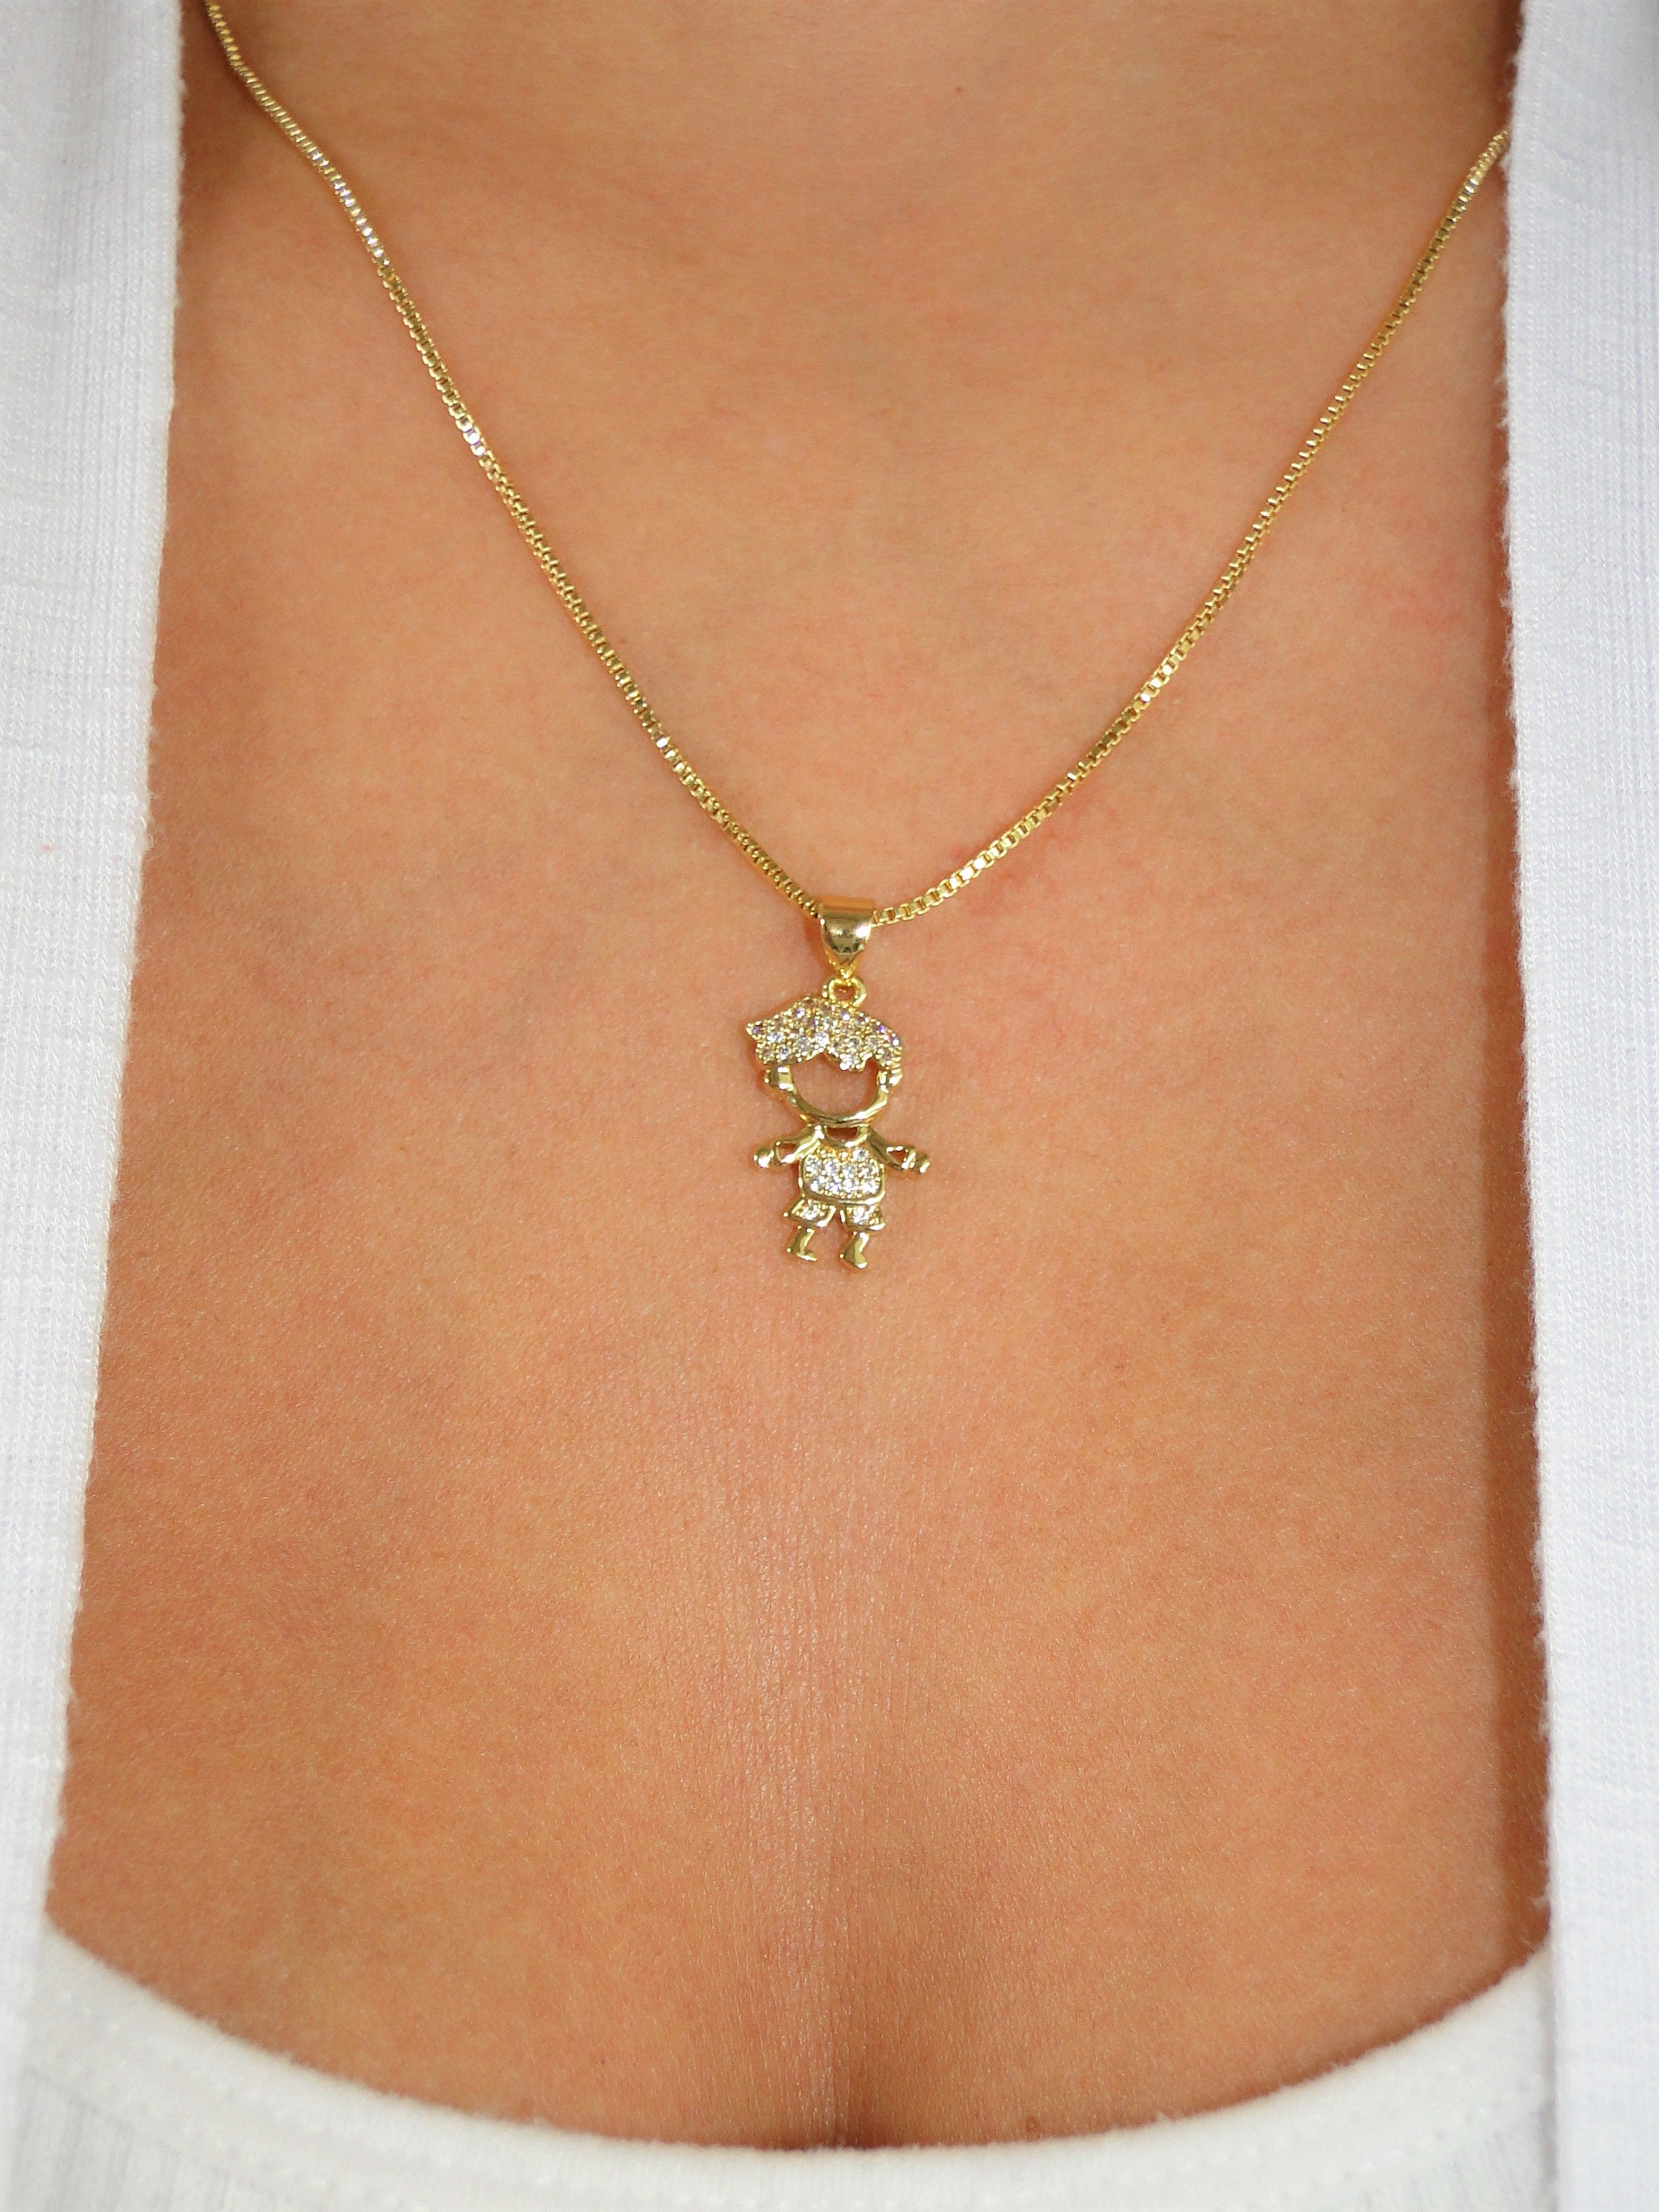 14k Gold Little Girl/Boy with Diamonds Charm Necklace – StonedLove by Suzy